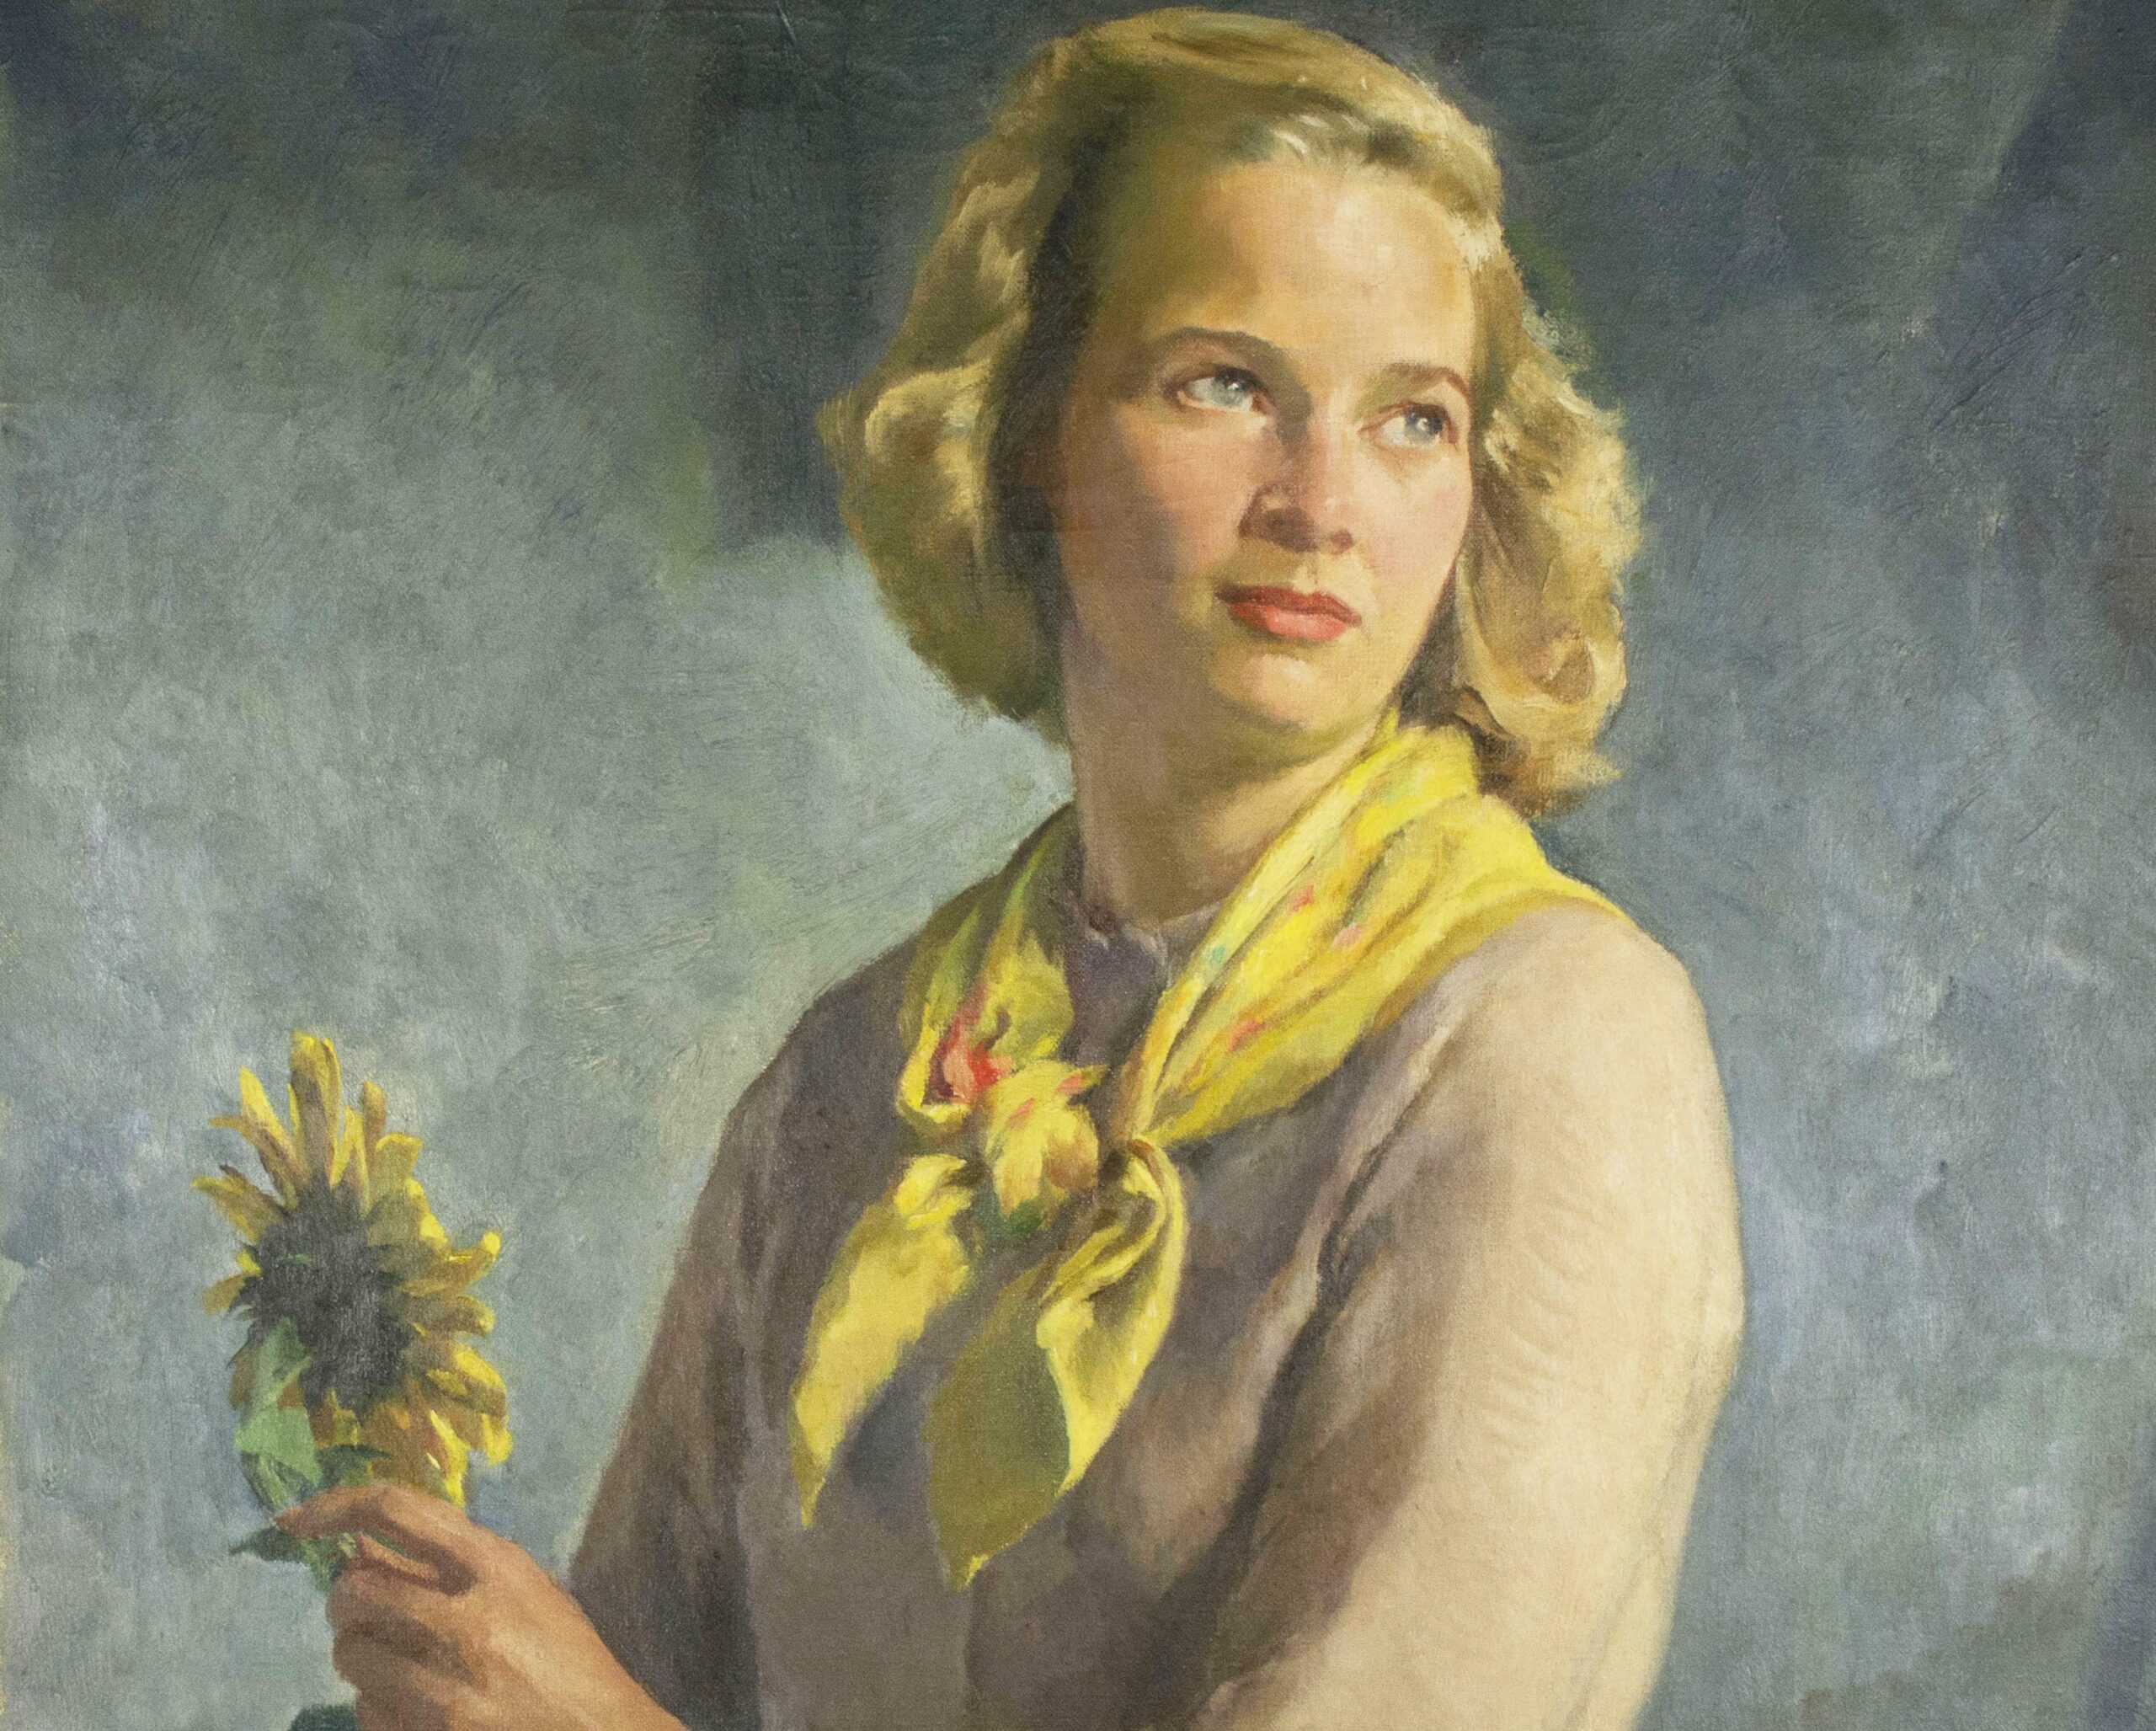 Impressionist oil painting of a woman with short blond hair wearing a beige sweater and yellow neckercheif looking back to the right. She is holding a sunflower in front of her at the bottom left.